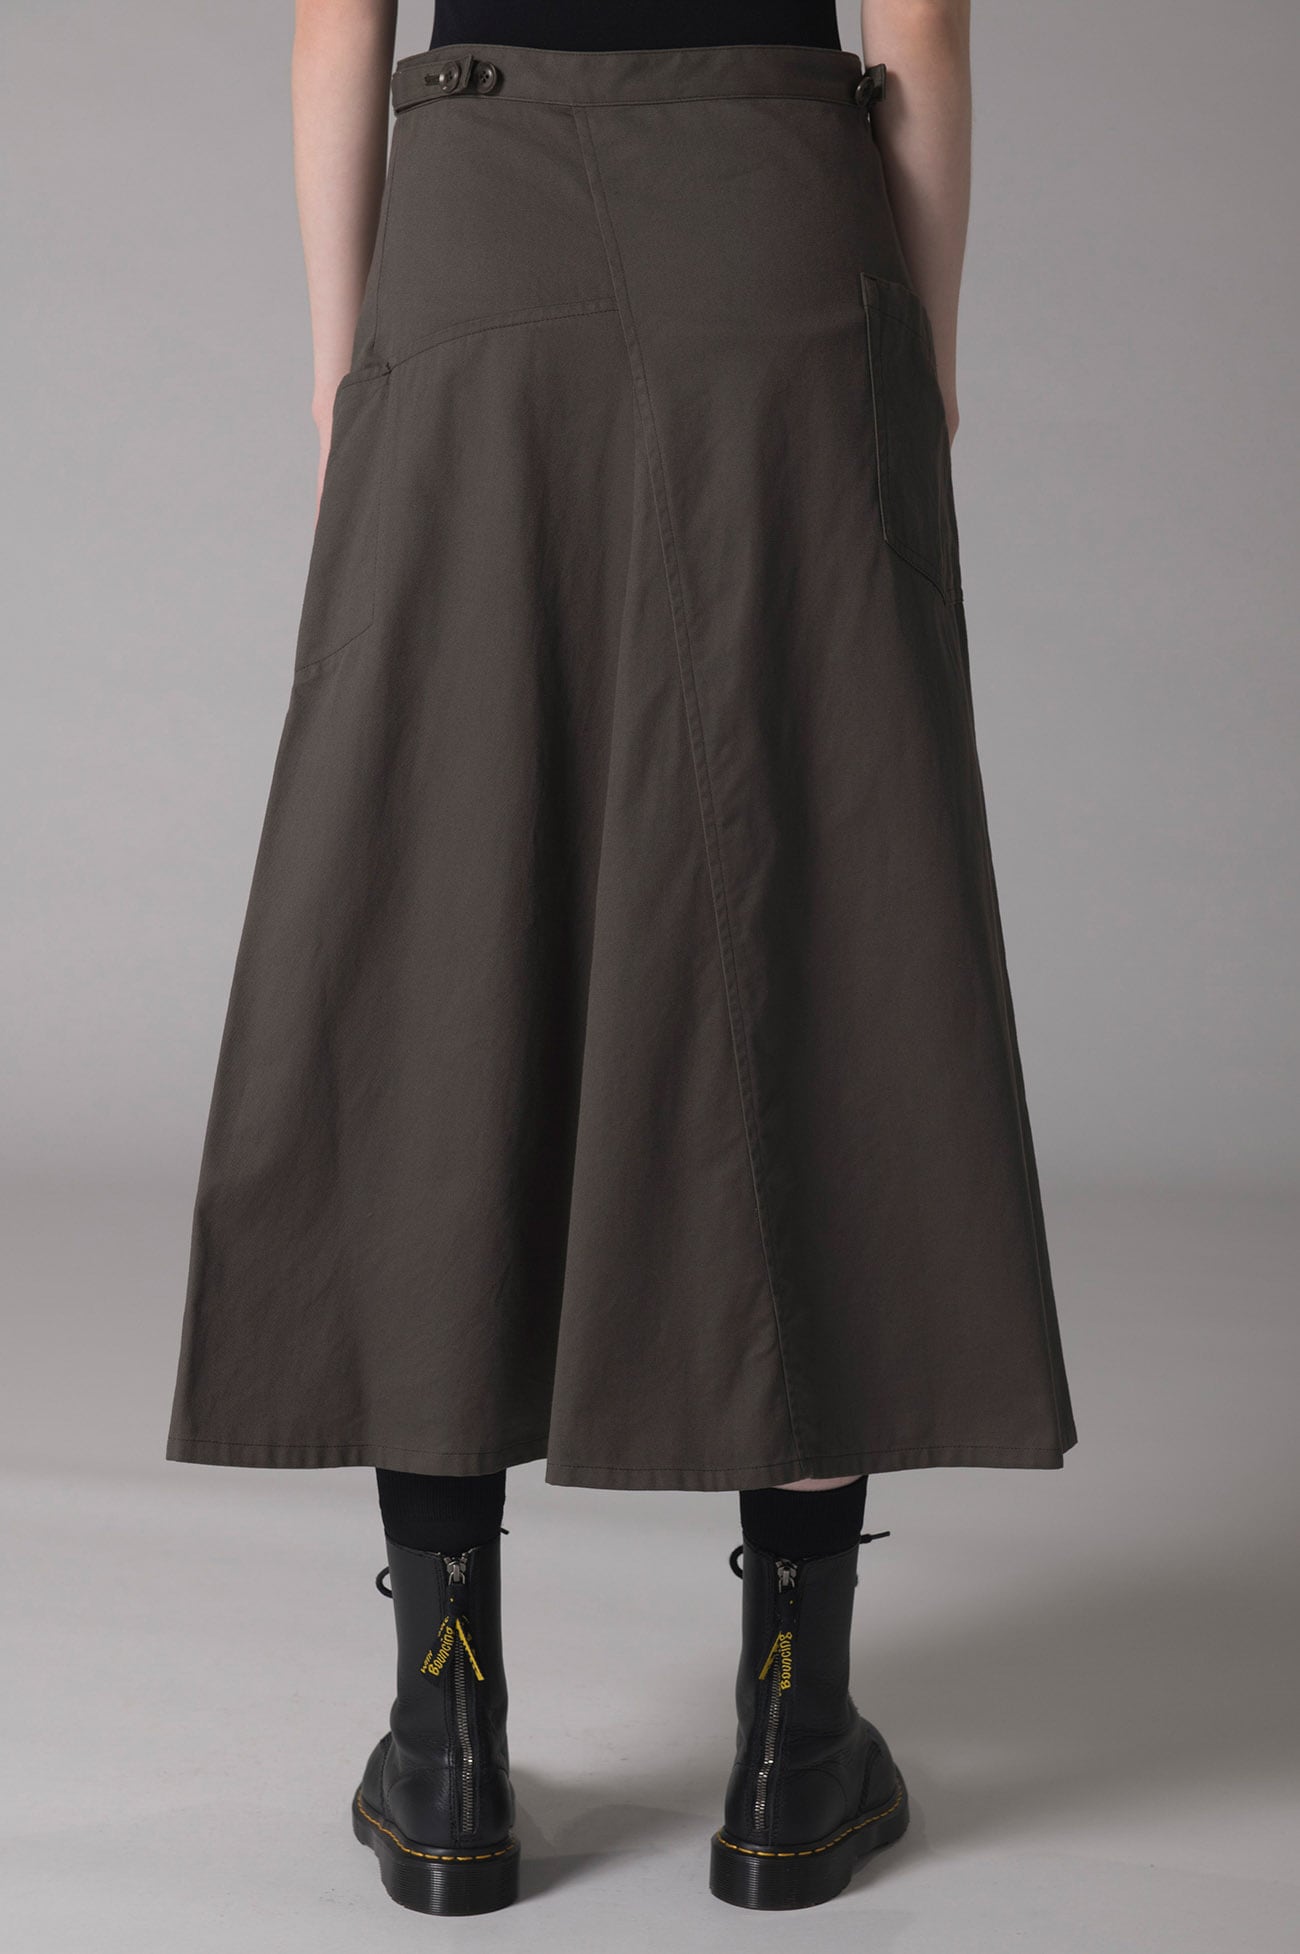 [Y's BORN PRODUT] COTTON TWILL FLARED SKIRT WITH GUSSETS